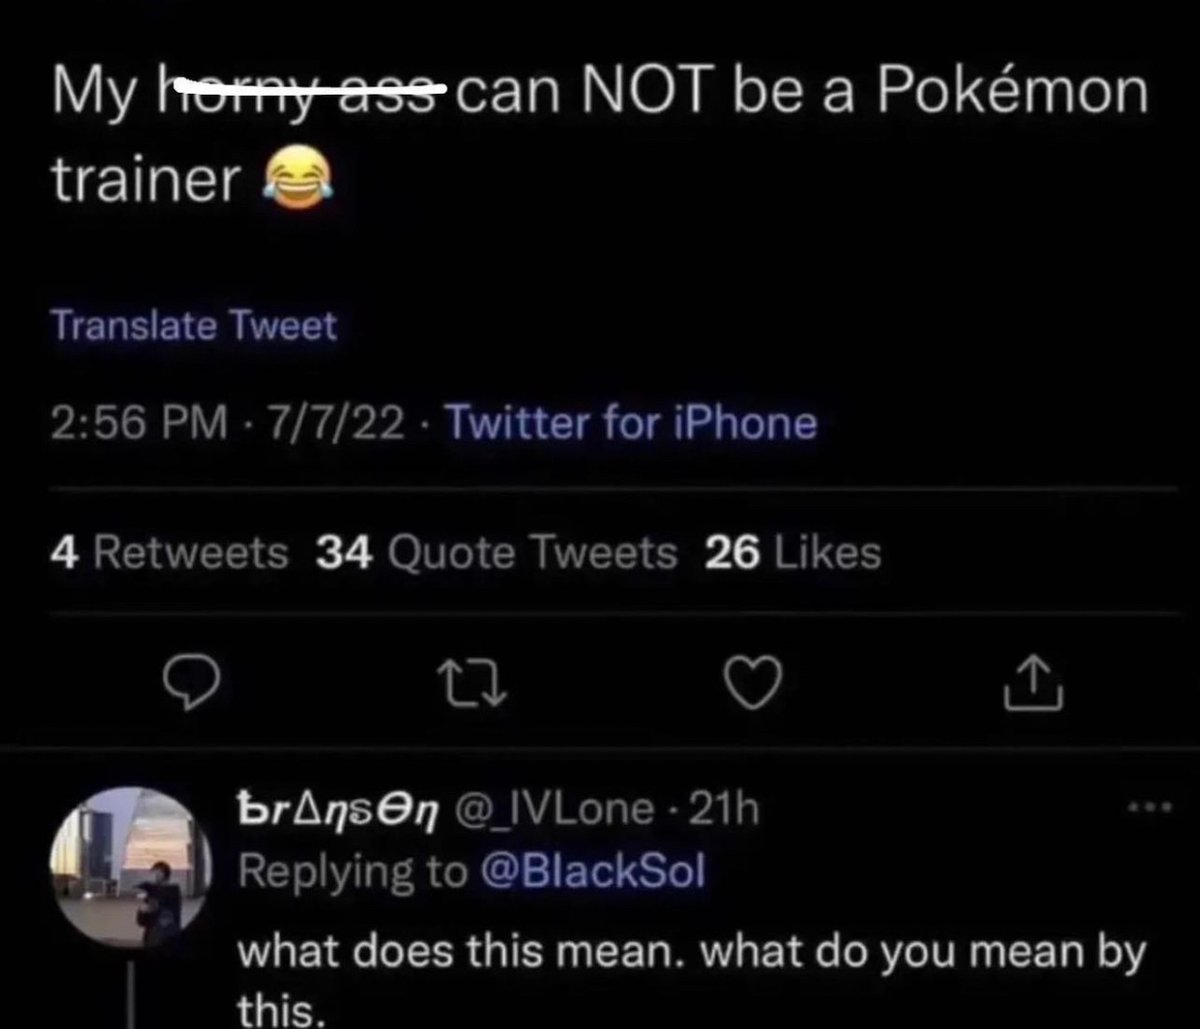 the internet hall of shame - - my horny ass could not own a pokemon - My horny ass can Not be a Pokmon trainer Translate Tweet 7722 Twitter for iPhone 4 34 Quote Tweets 26 22 bransen 21h what does this mean. what do you mean by this.